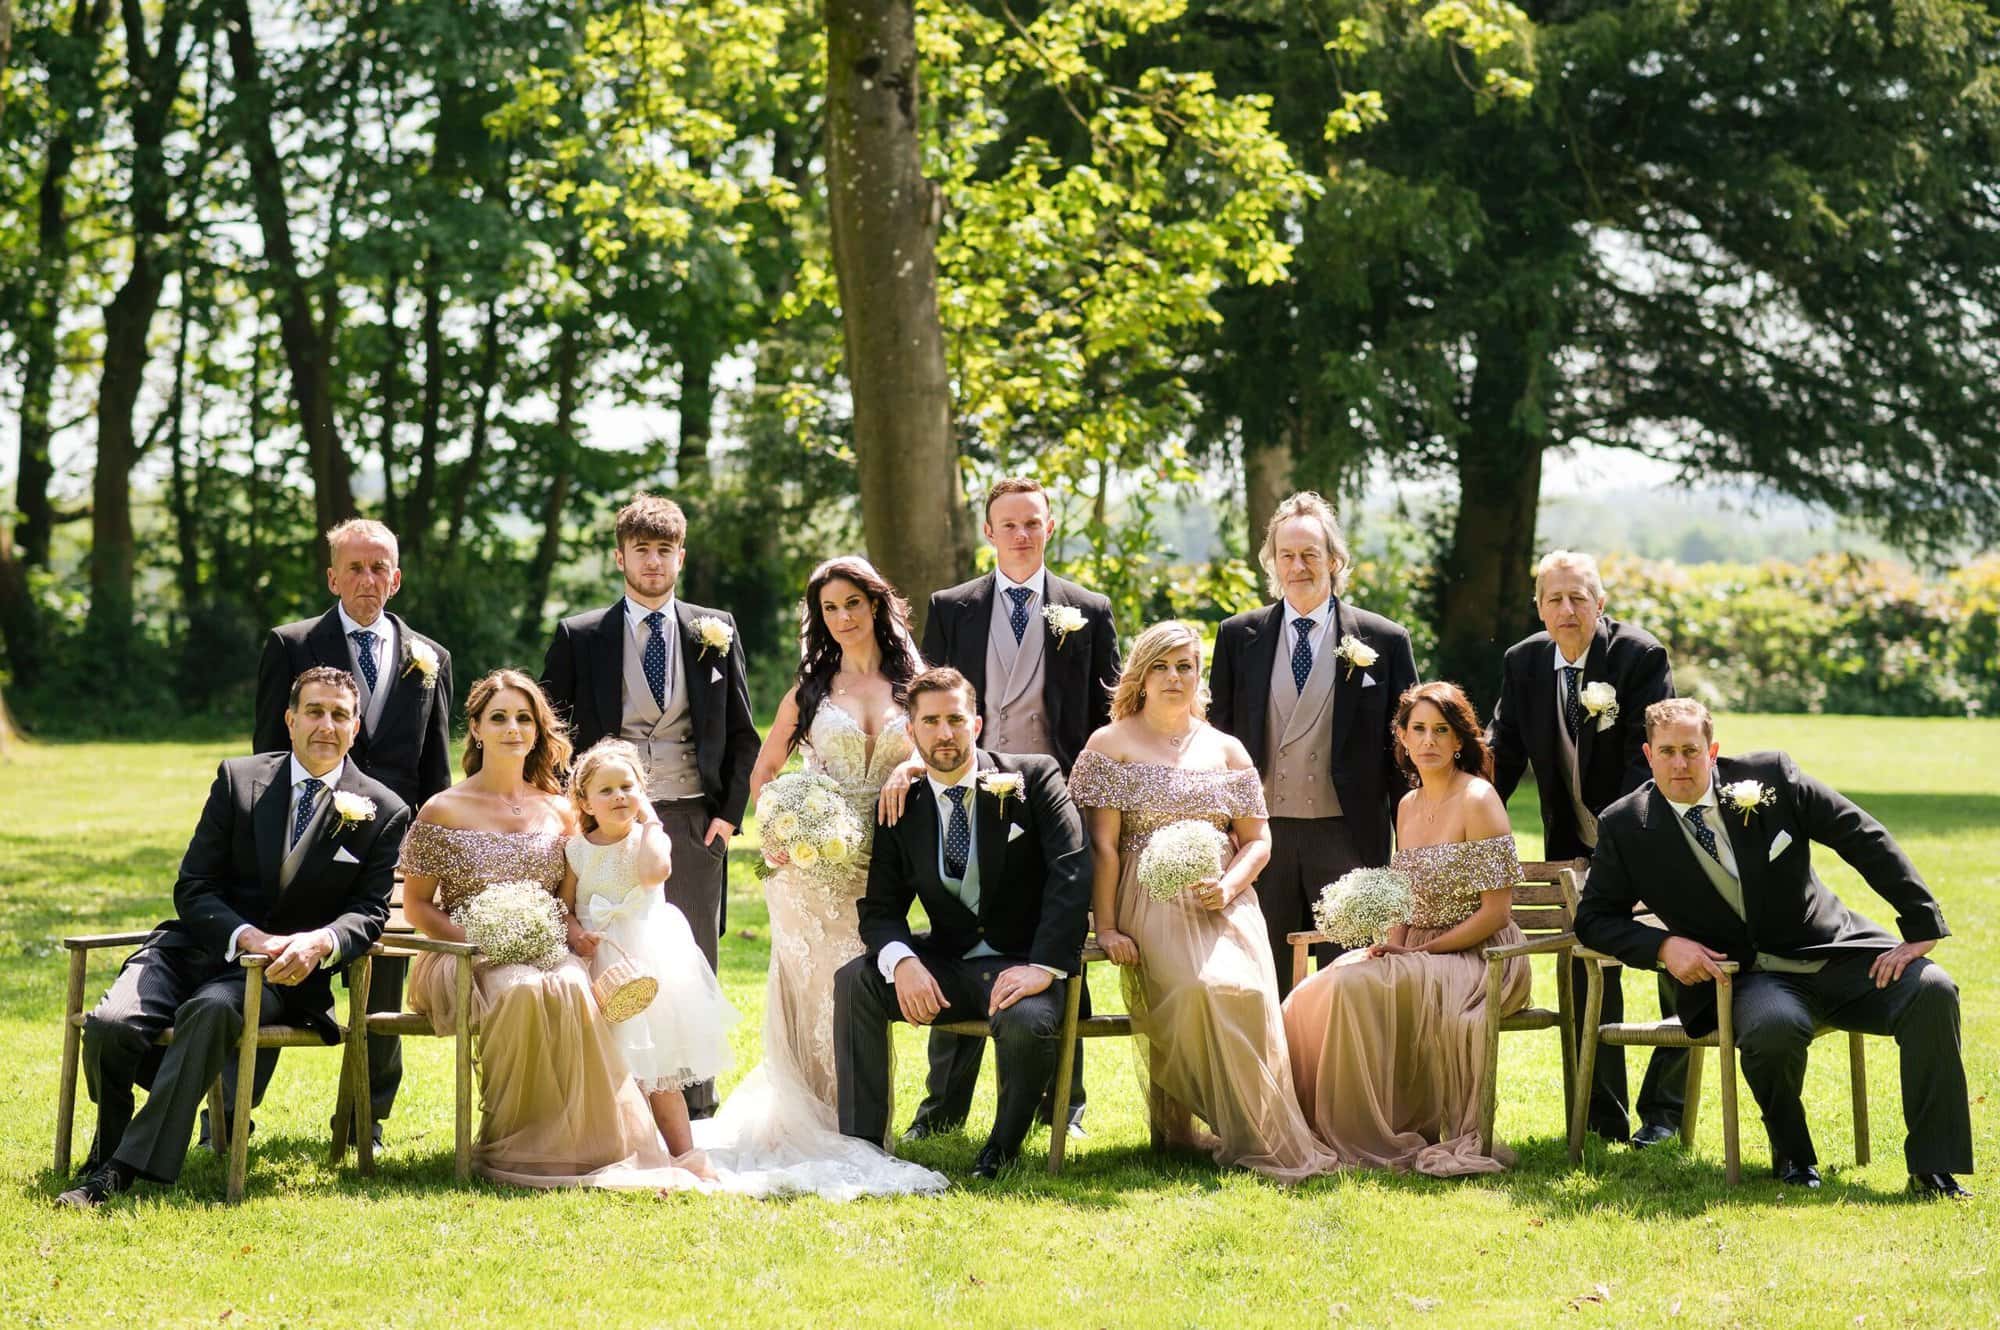 Vanity fair style photo of a wedding party at Abbots Court in Dorset